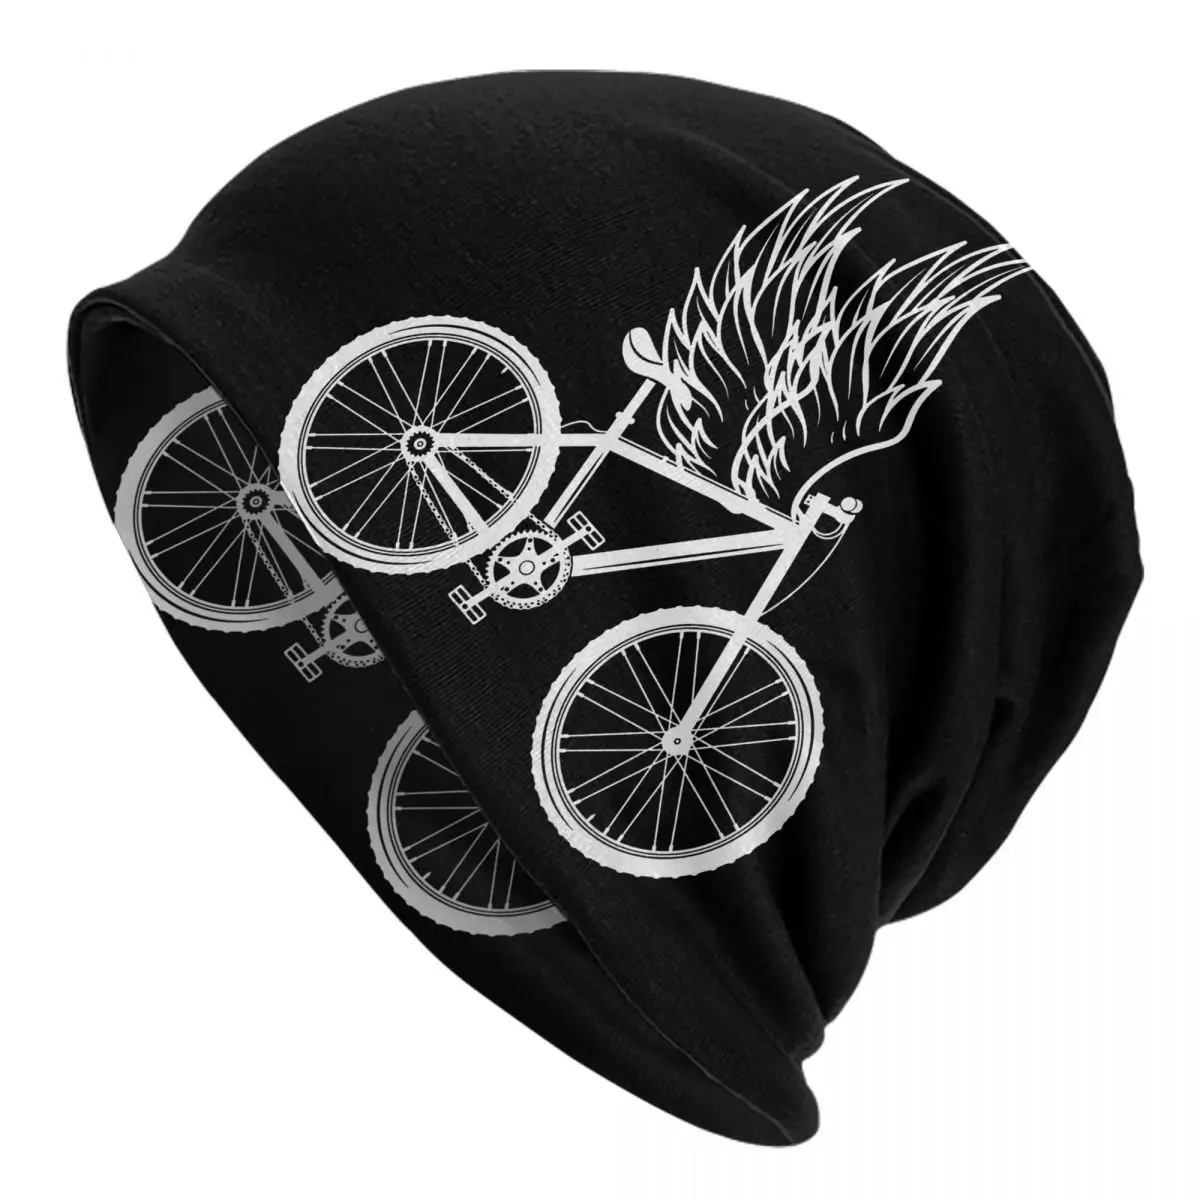 Bike Wings Biking Cycling Bicycle Cyclist Gift Adult Men's Women's Knit Hat Keep warm winter Funny knitted hat